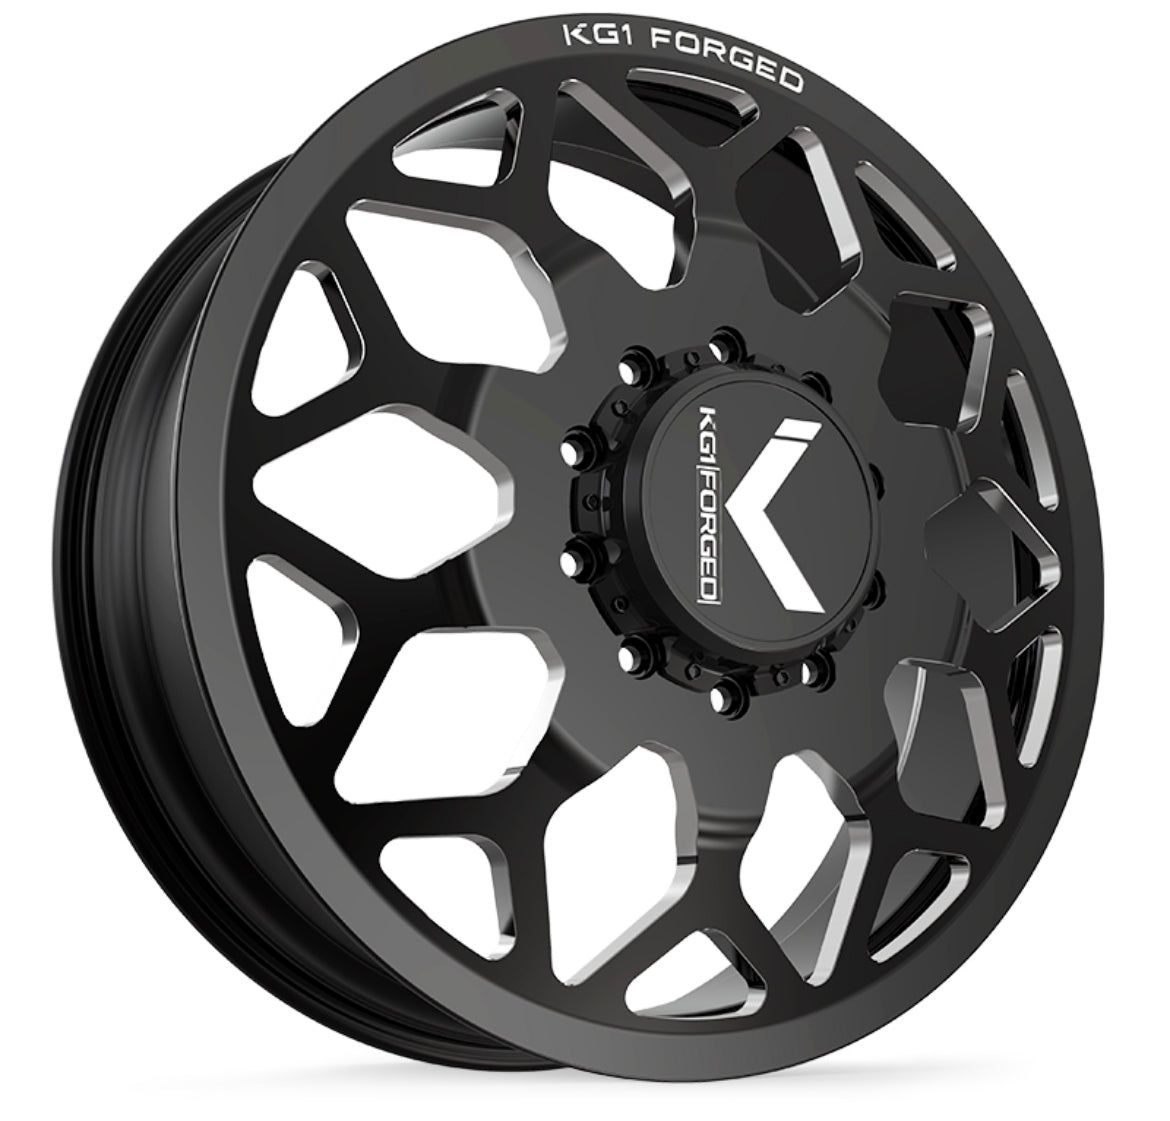 KG1 FORGED DUALLY LUXOR KD016